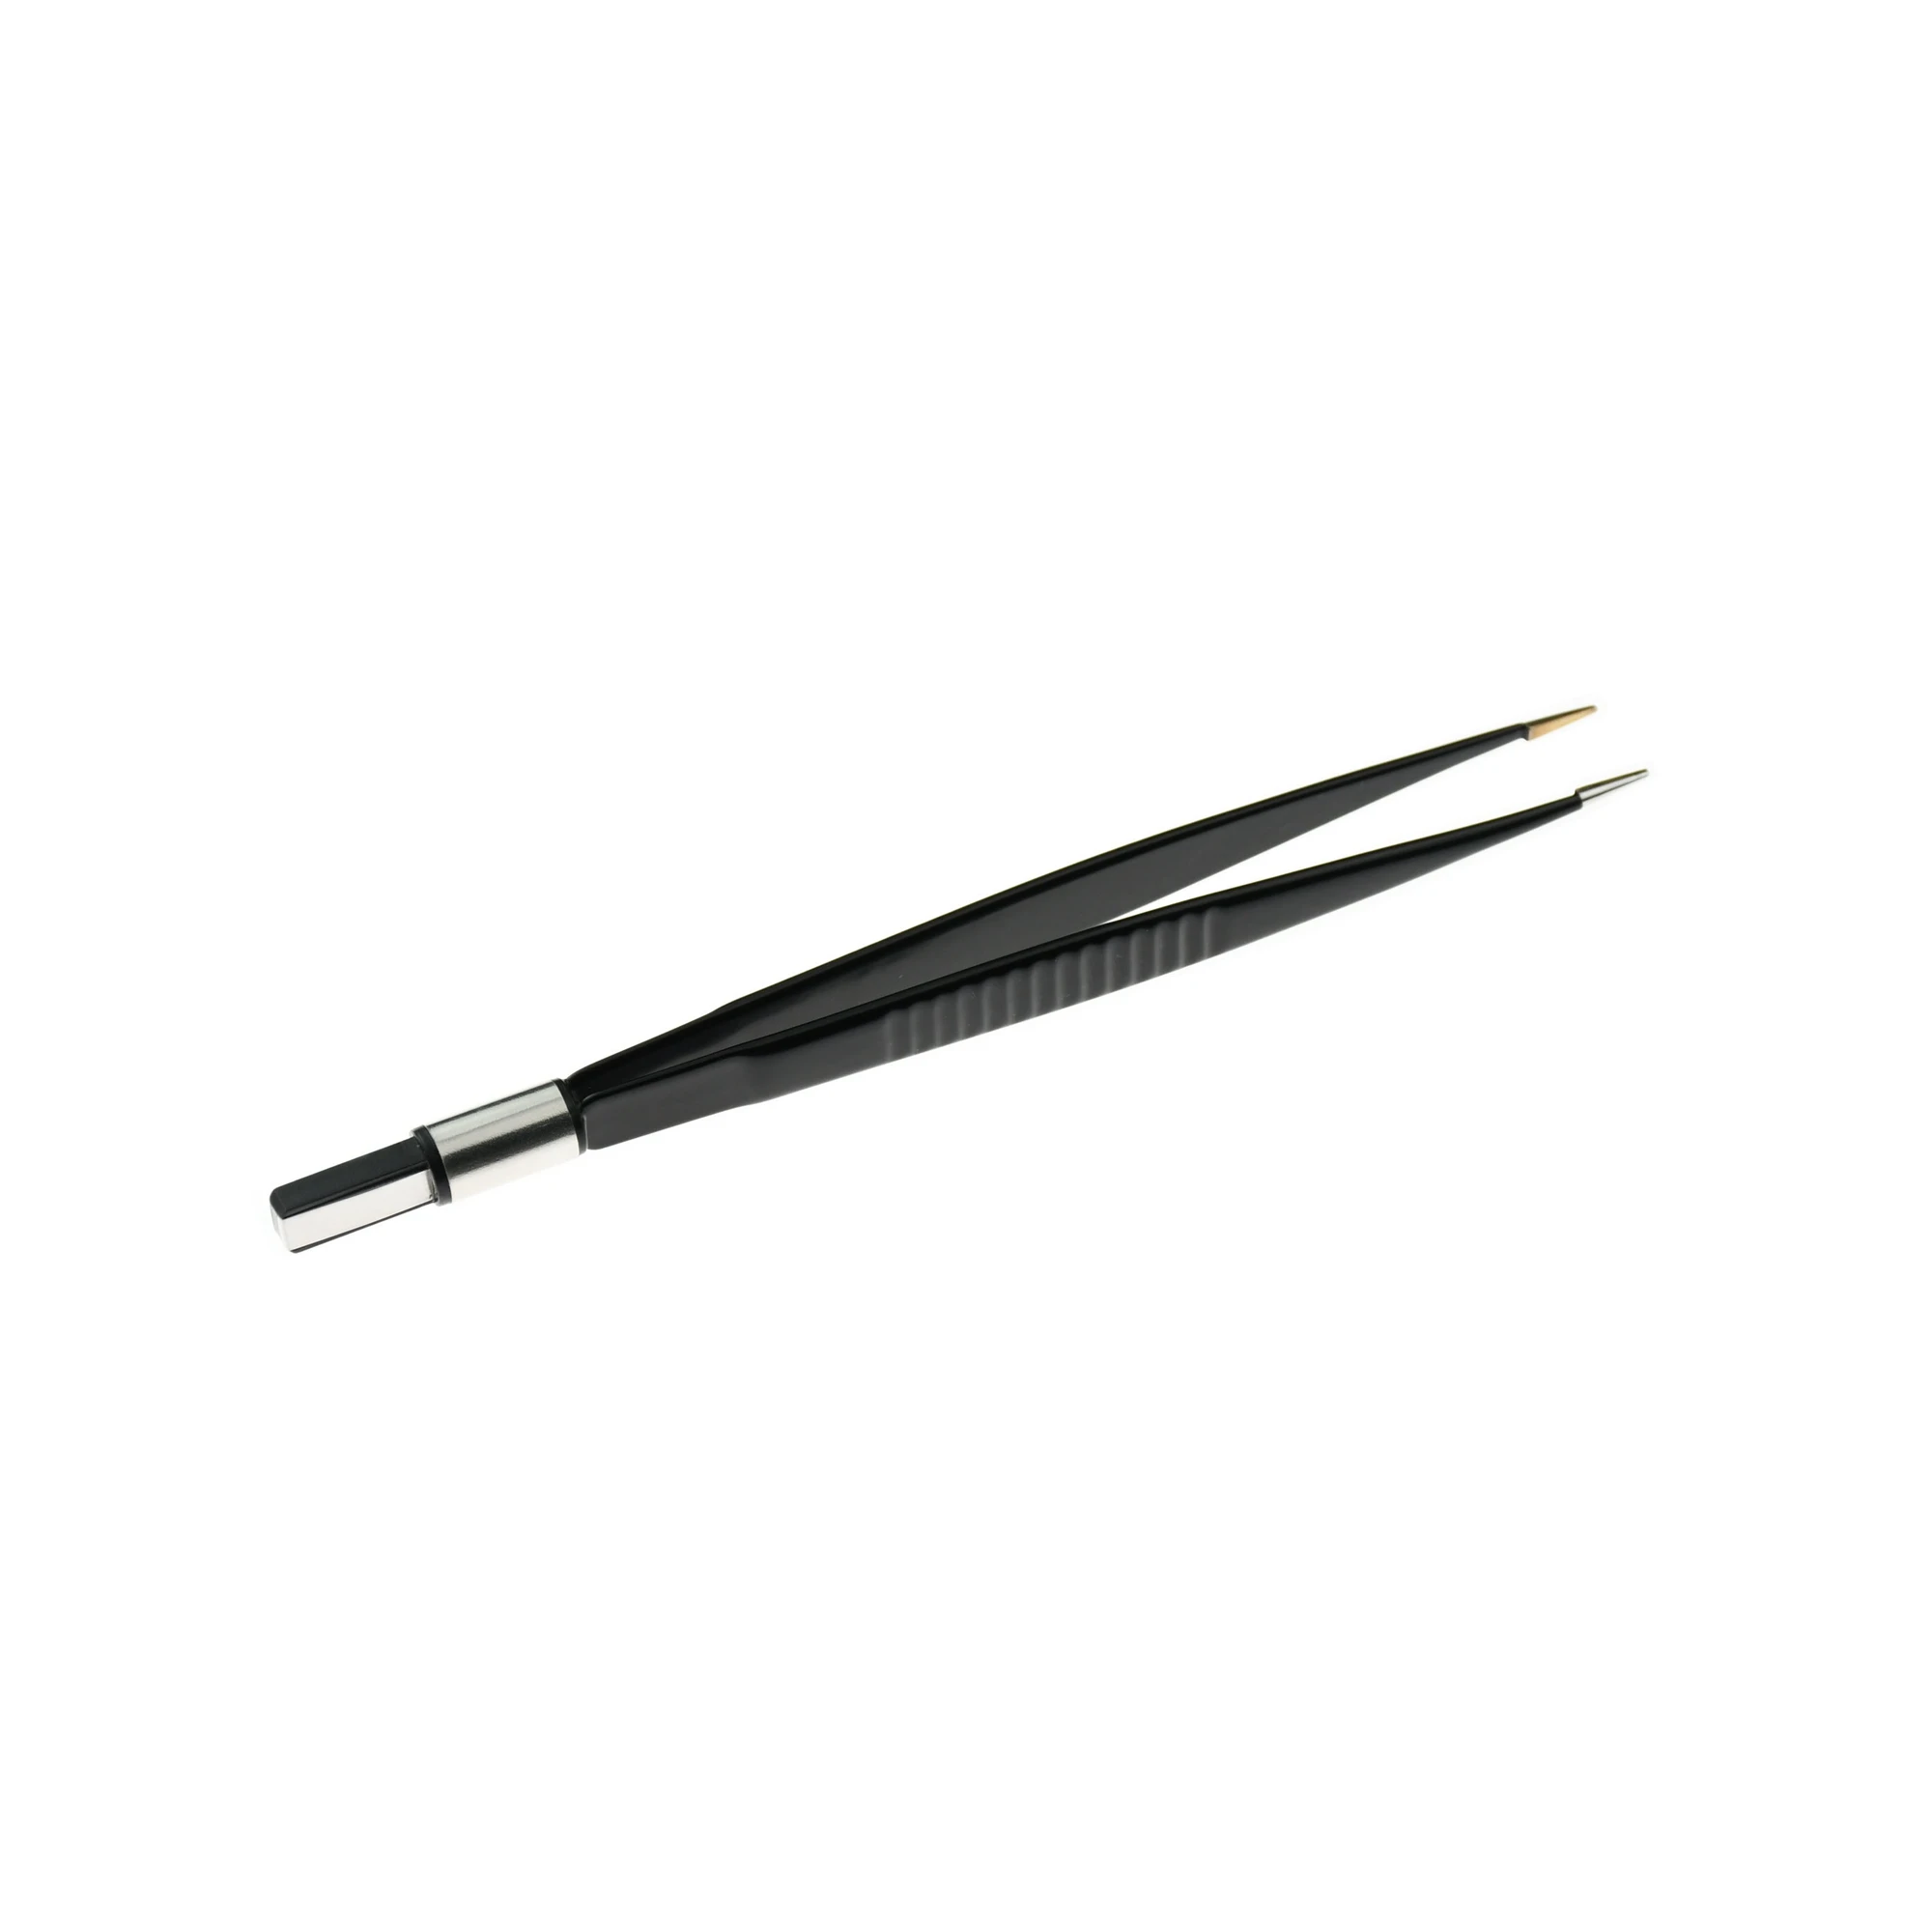 IEC Bipolar Forceps Tweezers Straight tip Electrosurgical unit,Black nylon coated Non Stick with cable 5/2mm connector to IEC